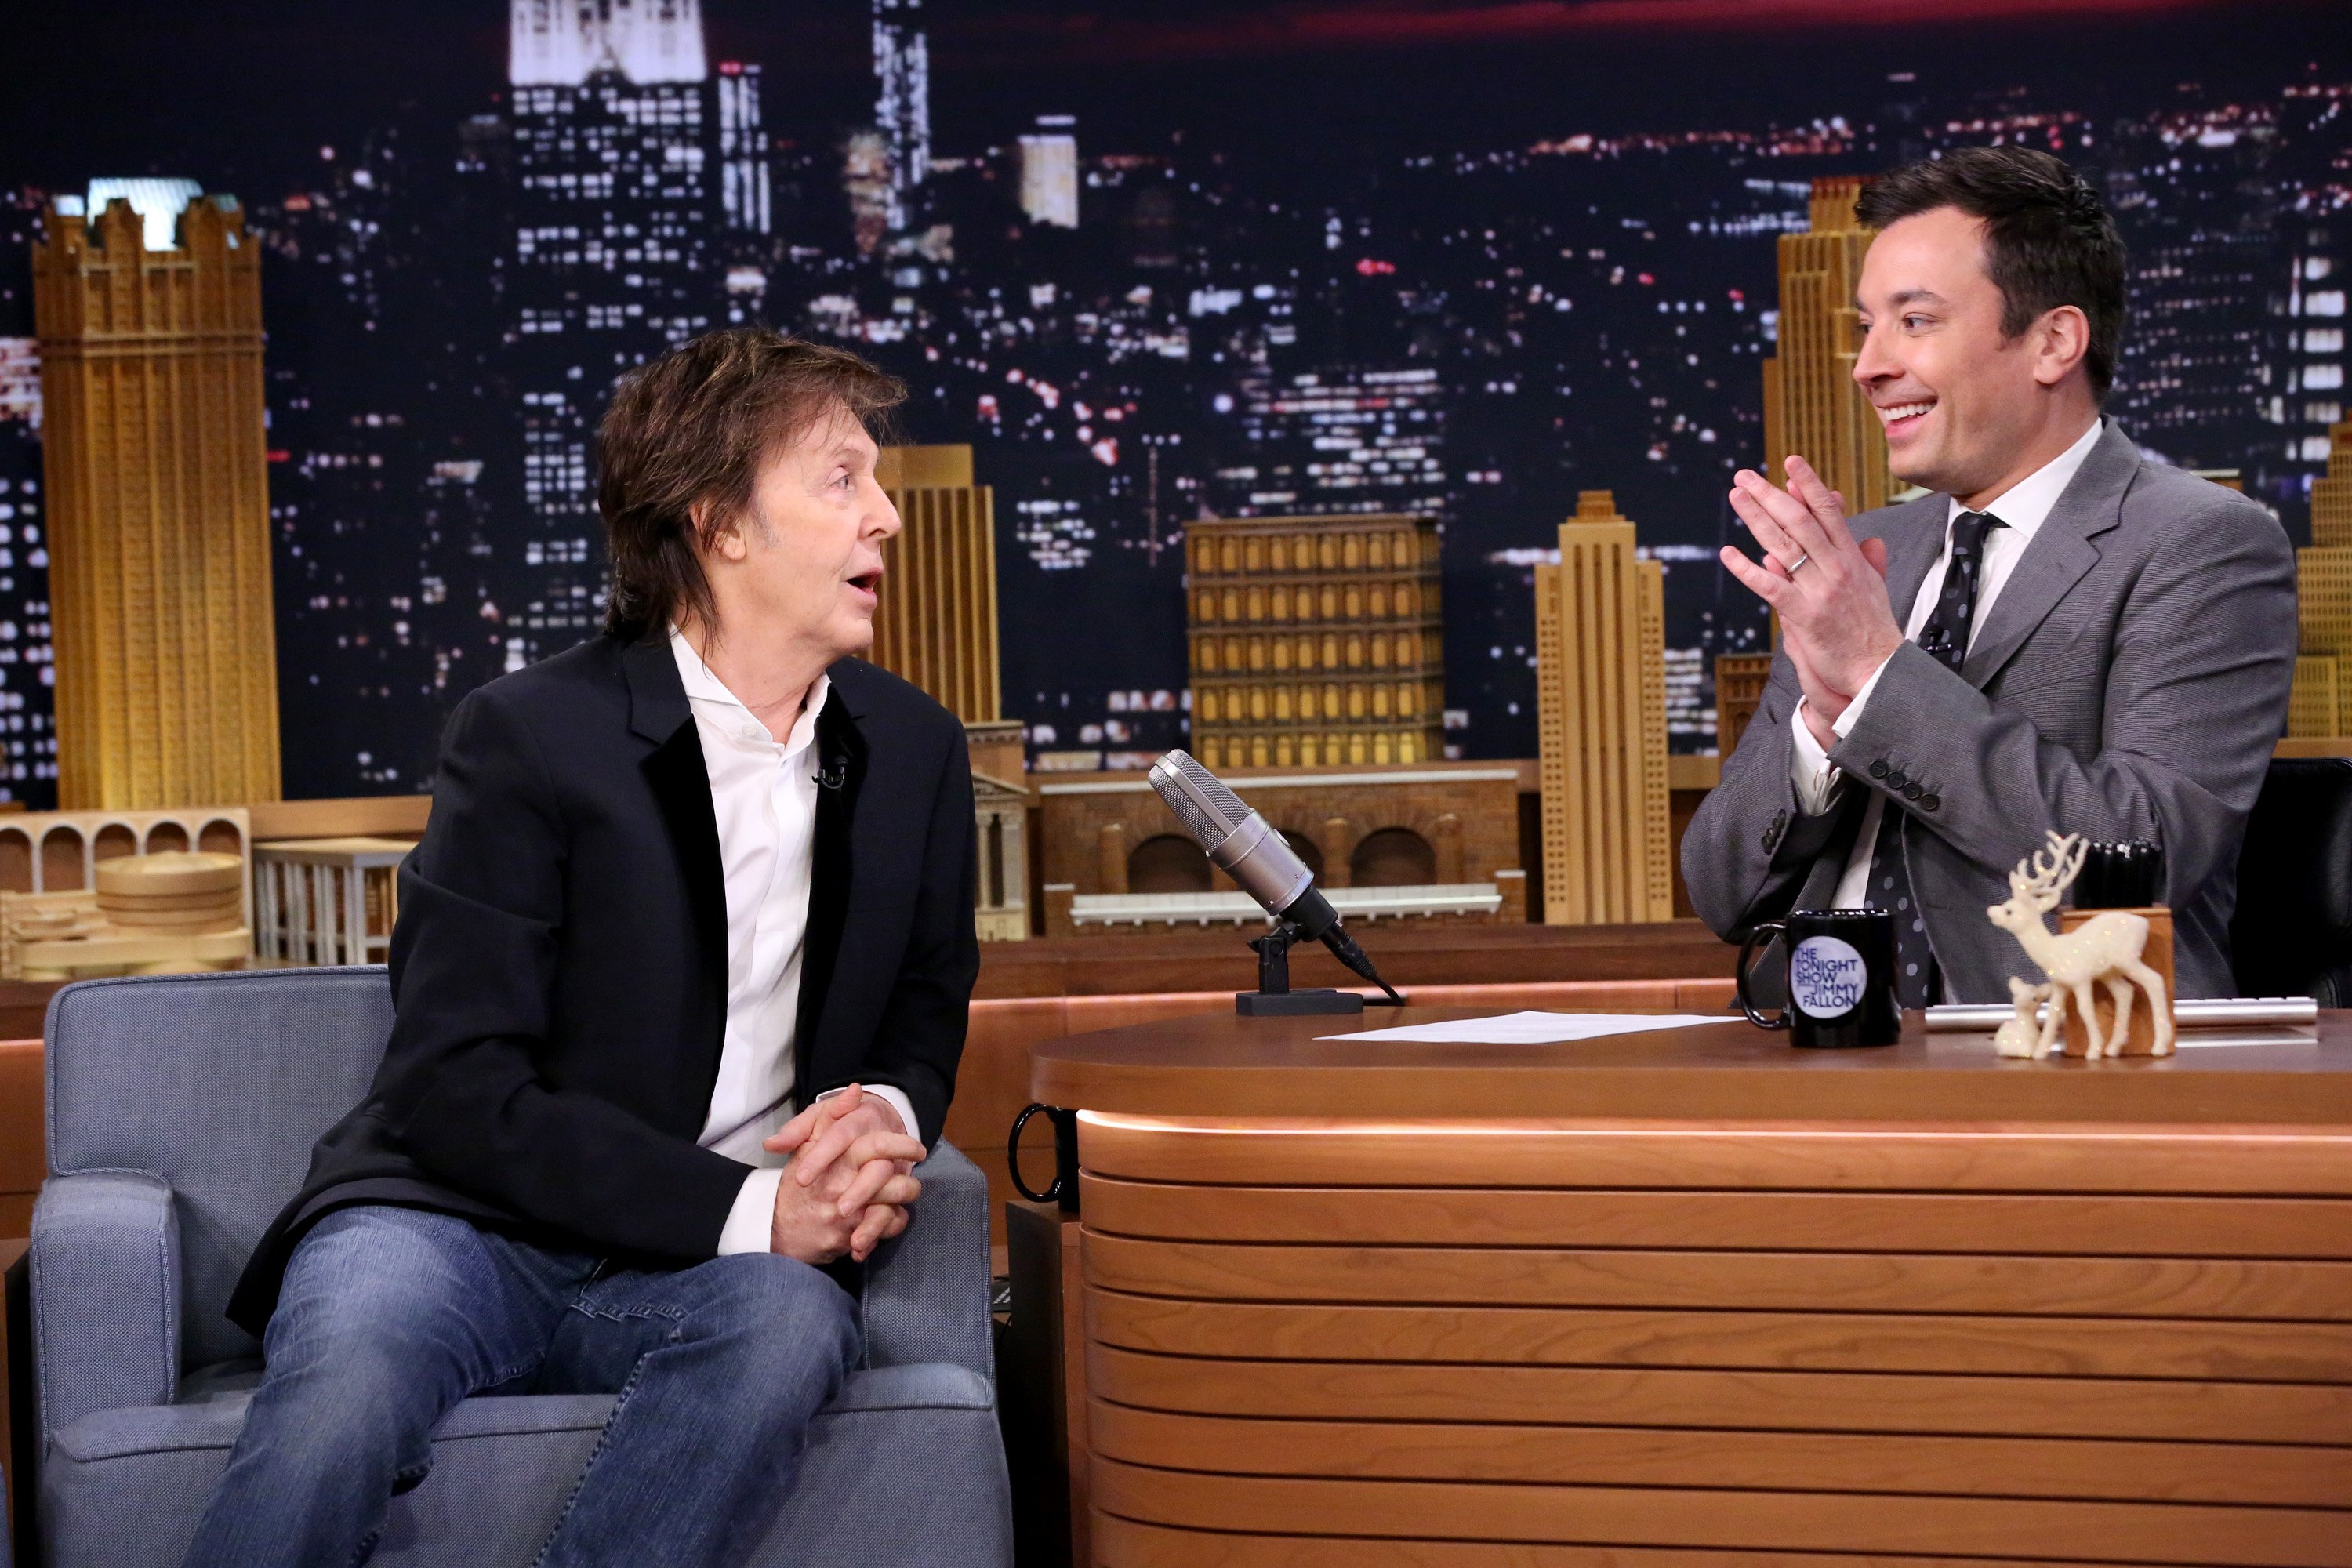 Paul McCartney Shares Which Celebrity Does the Best Impression of Him